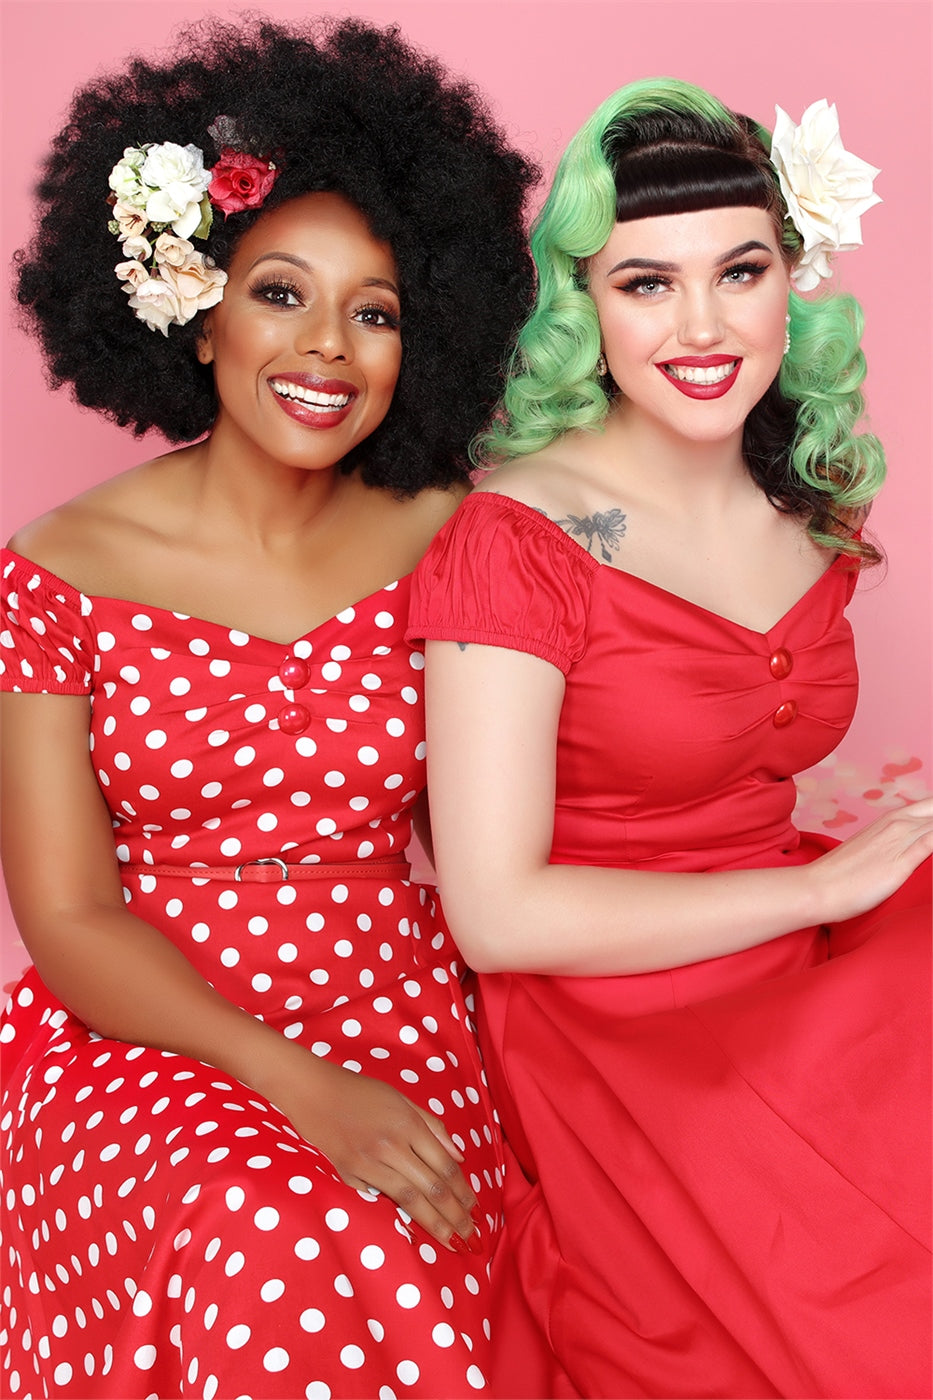 Pin up 40s and 50s models wearing red lipstick, hair flowers and dolores dresses 